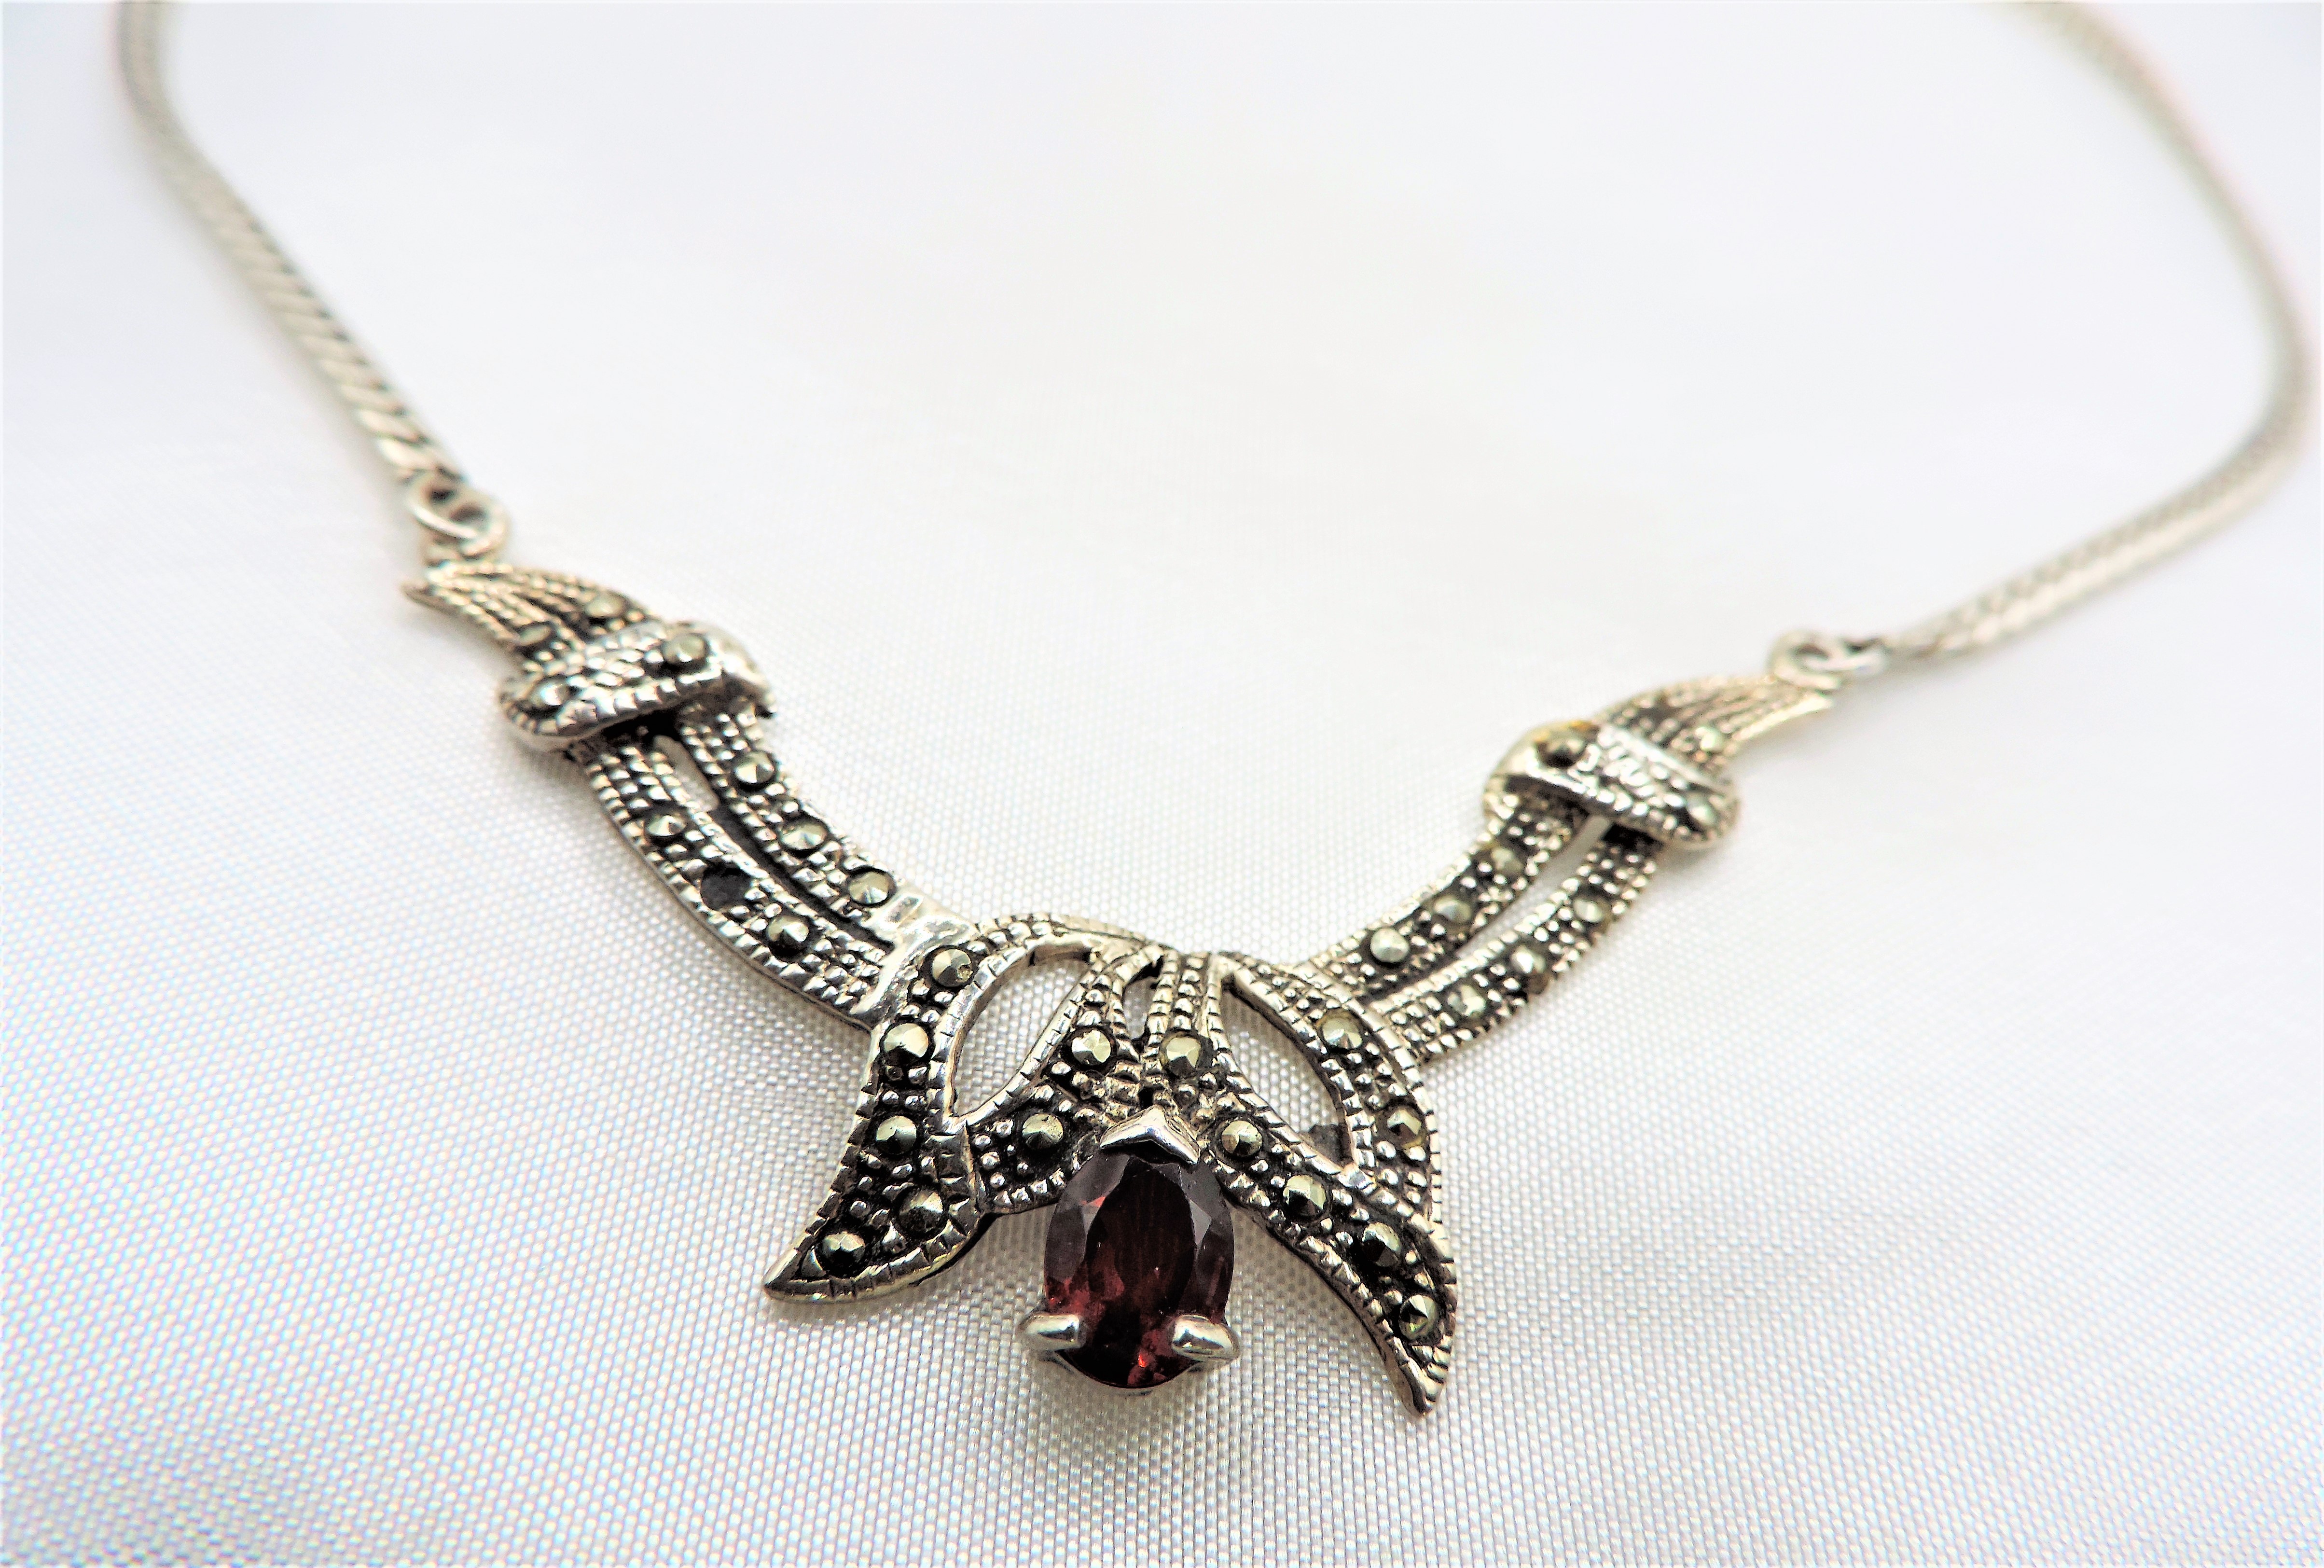 Vintage Marcasite & Garnet Necklace. A lovely necklace 16 inches long set with Marcasites and a - Image 2 of 3